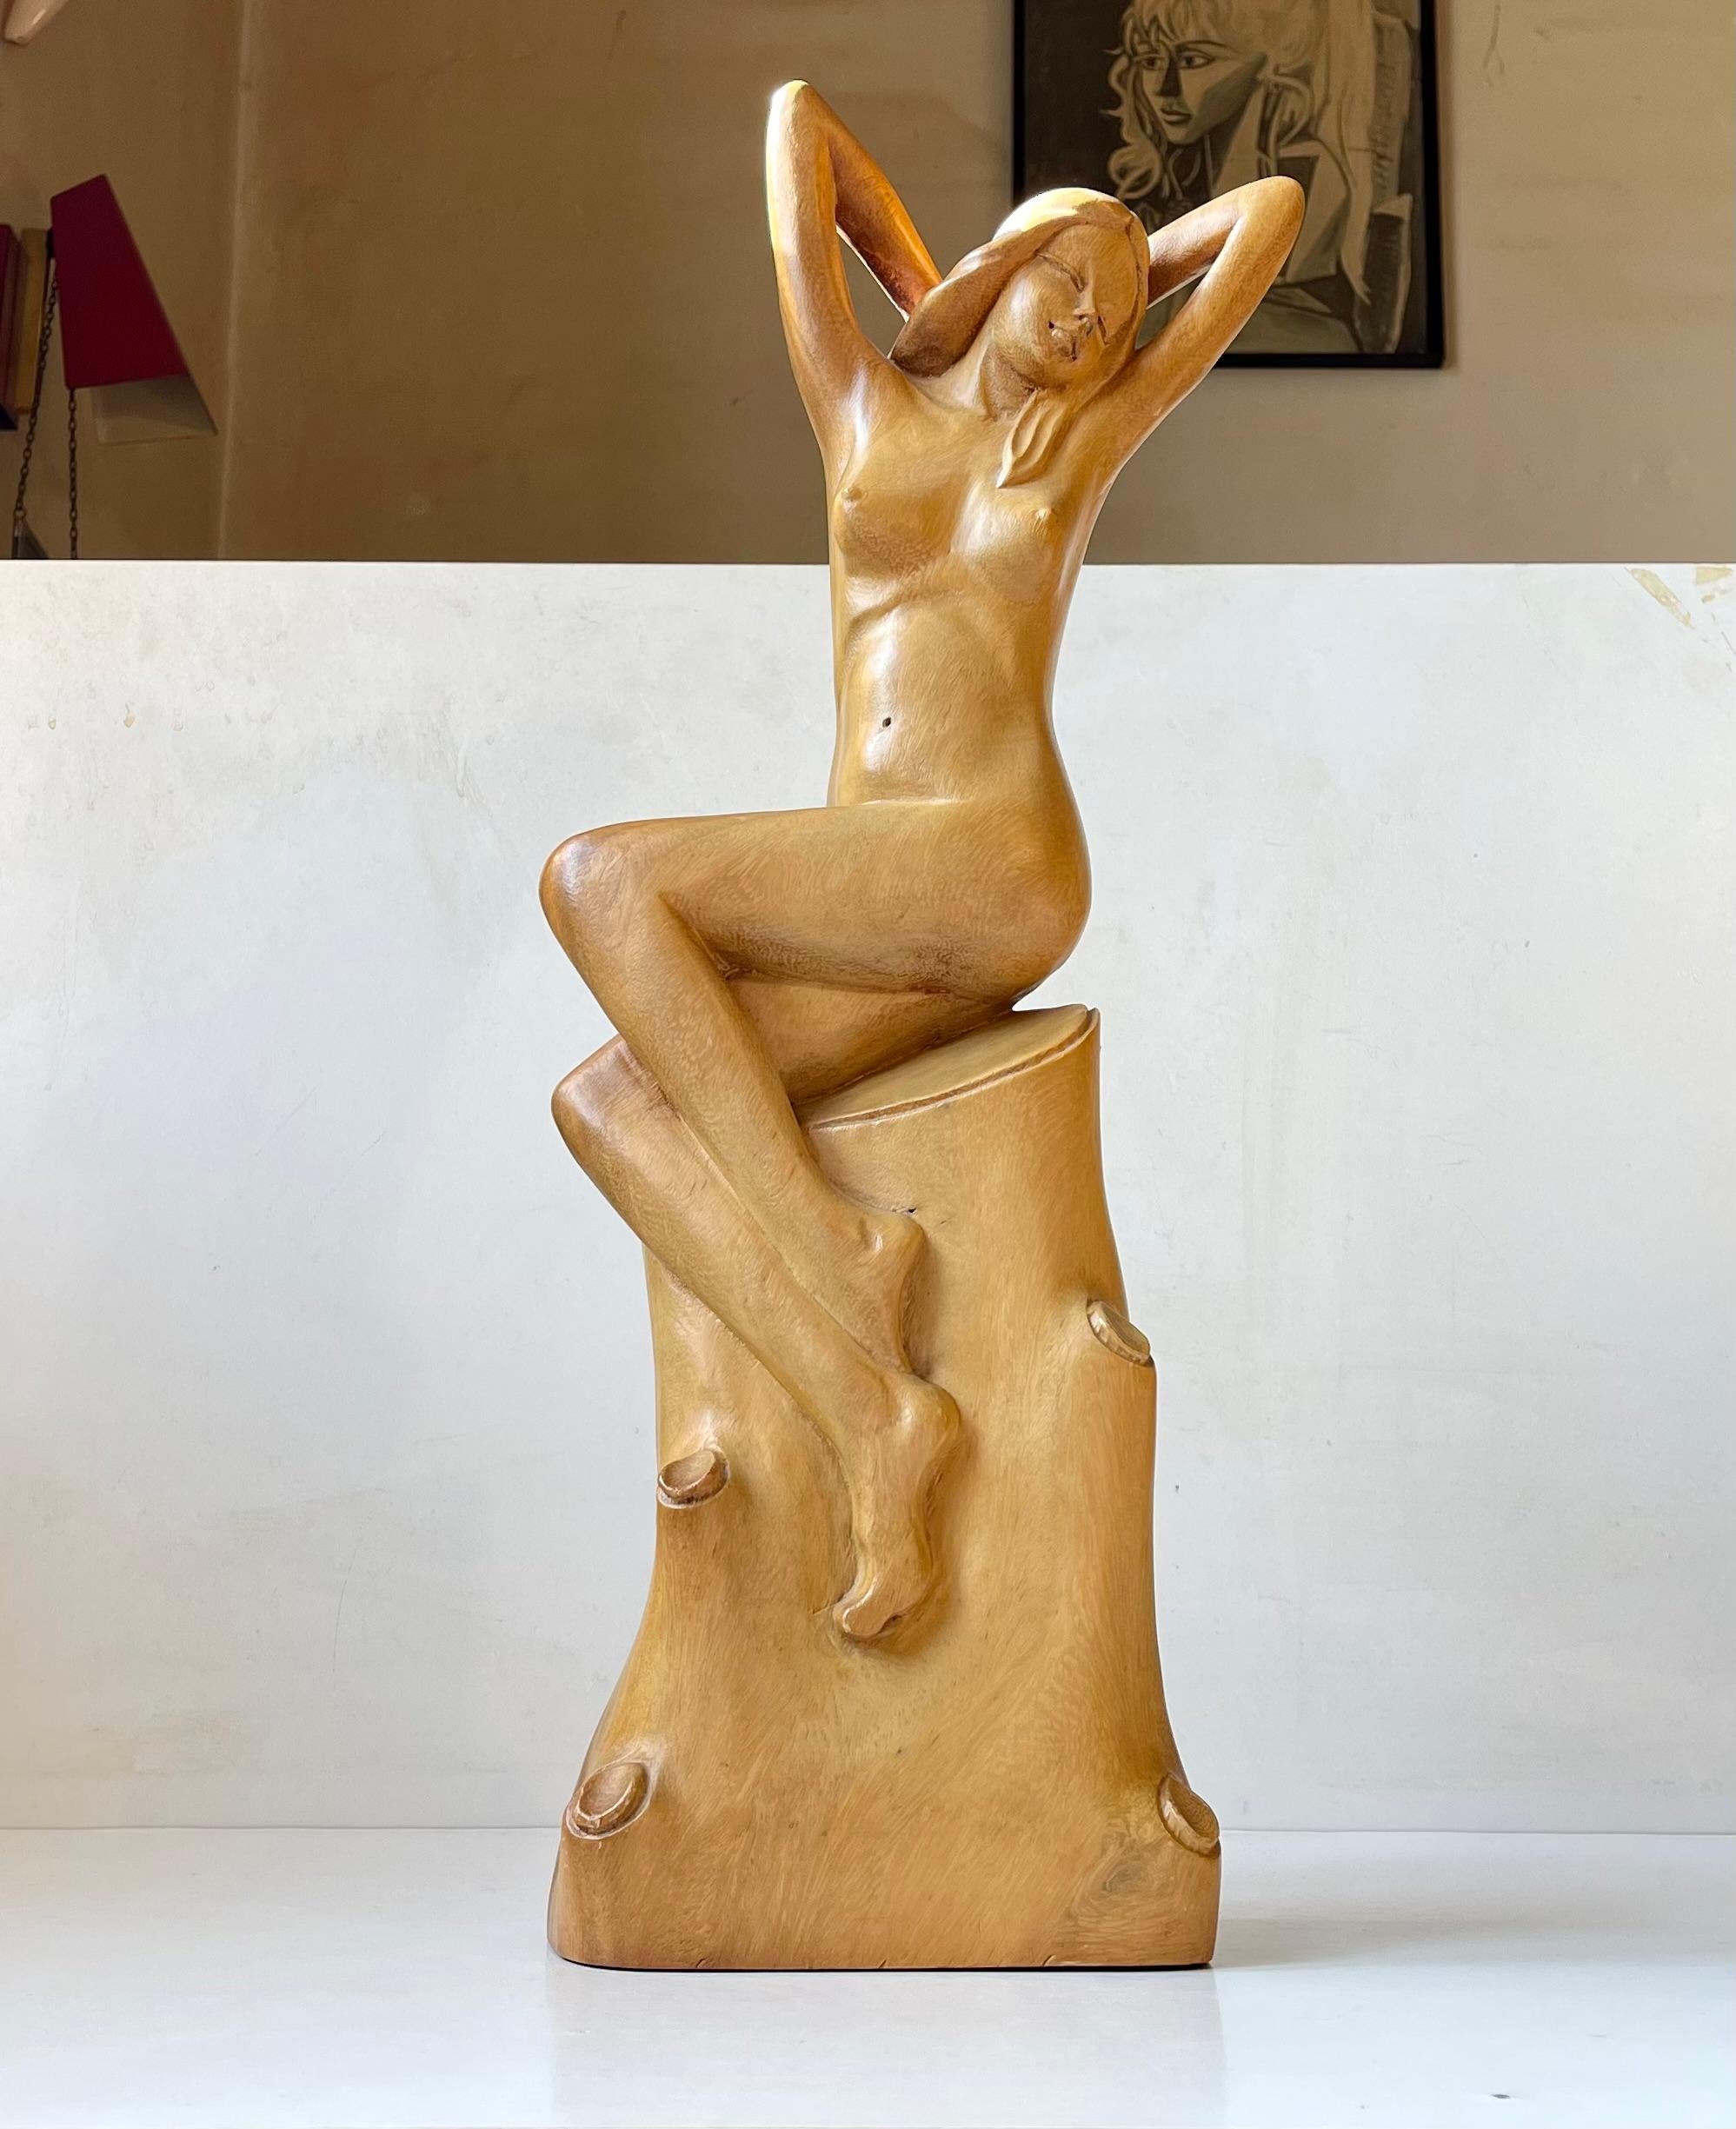 Art Deco Sculpture of Nude Female in Hand-Carved Wood, 1940s Scandinavia In Good Condition For Sale In Esbjerg, DK